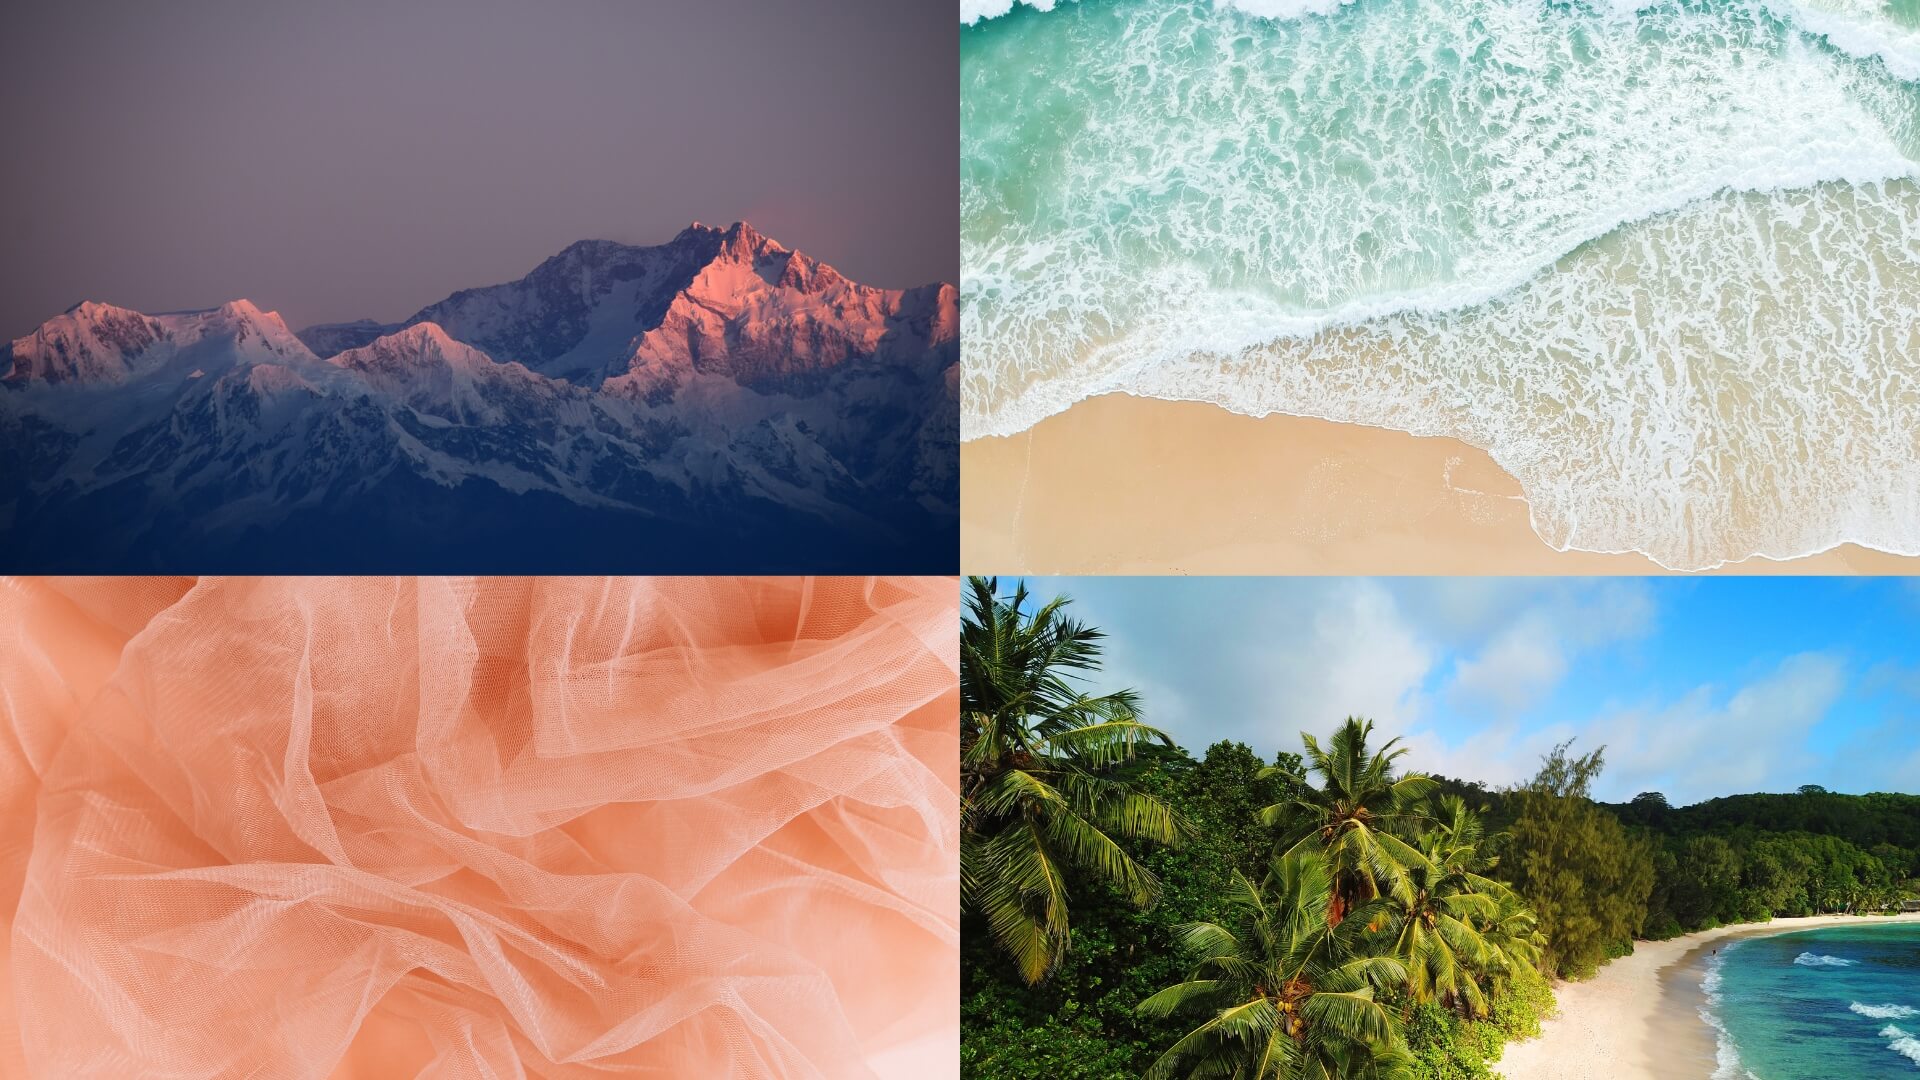 Wallpapers of Microsoft